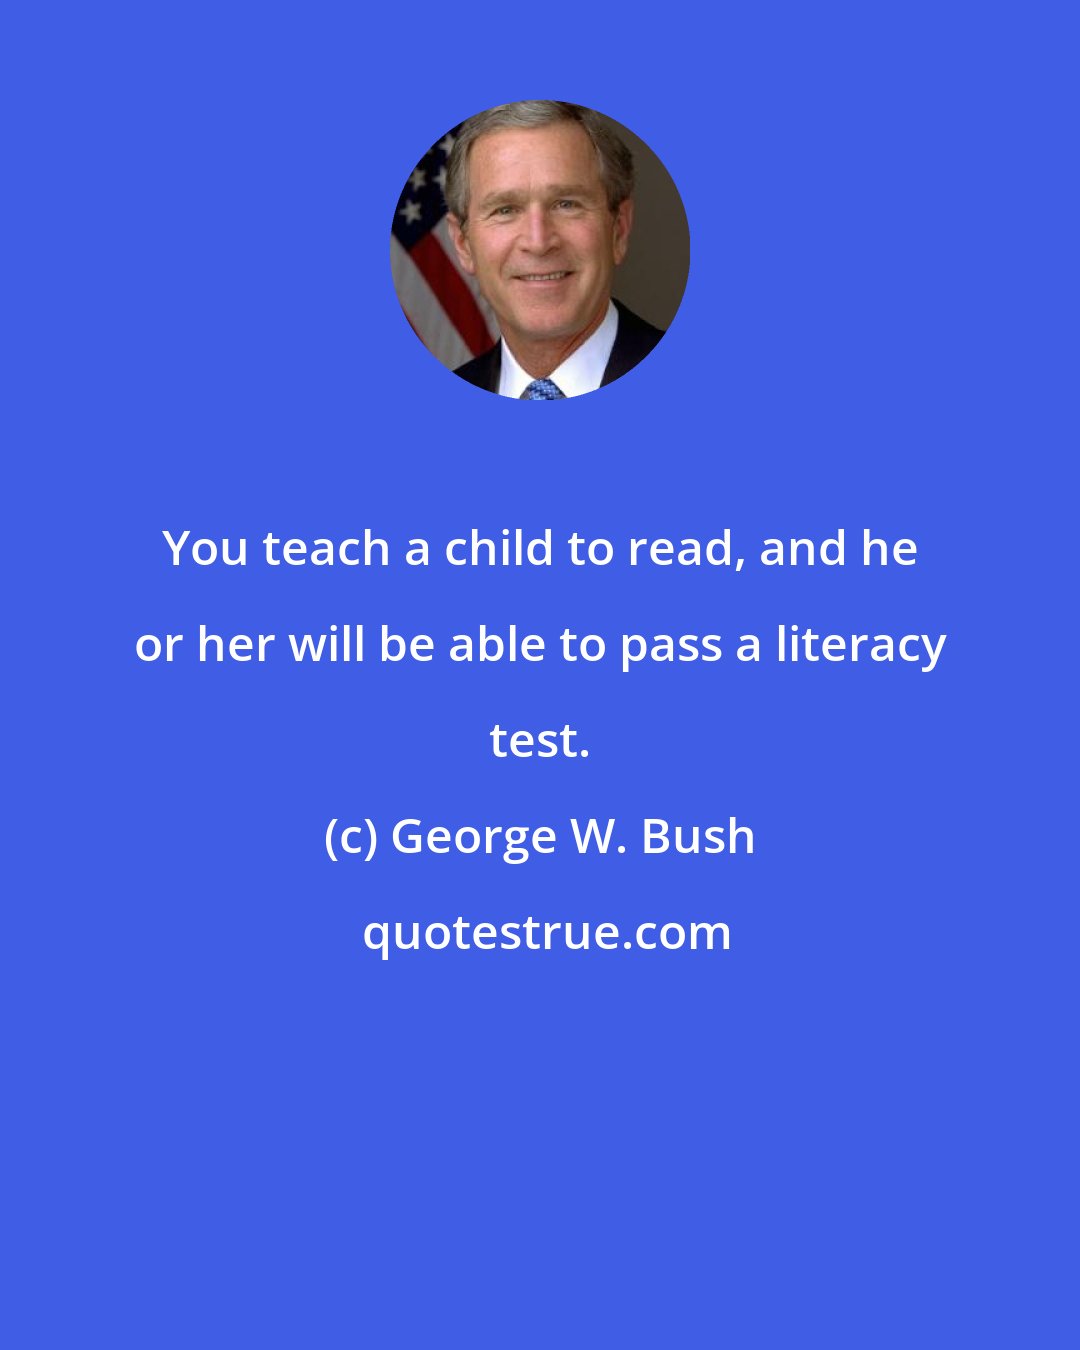 George W. Bush: You teach a child to read, and he or her will be able to pass a literacy test.